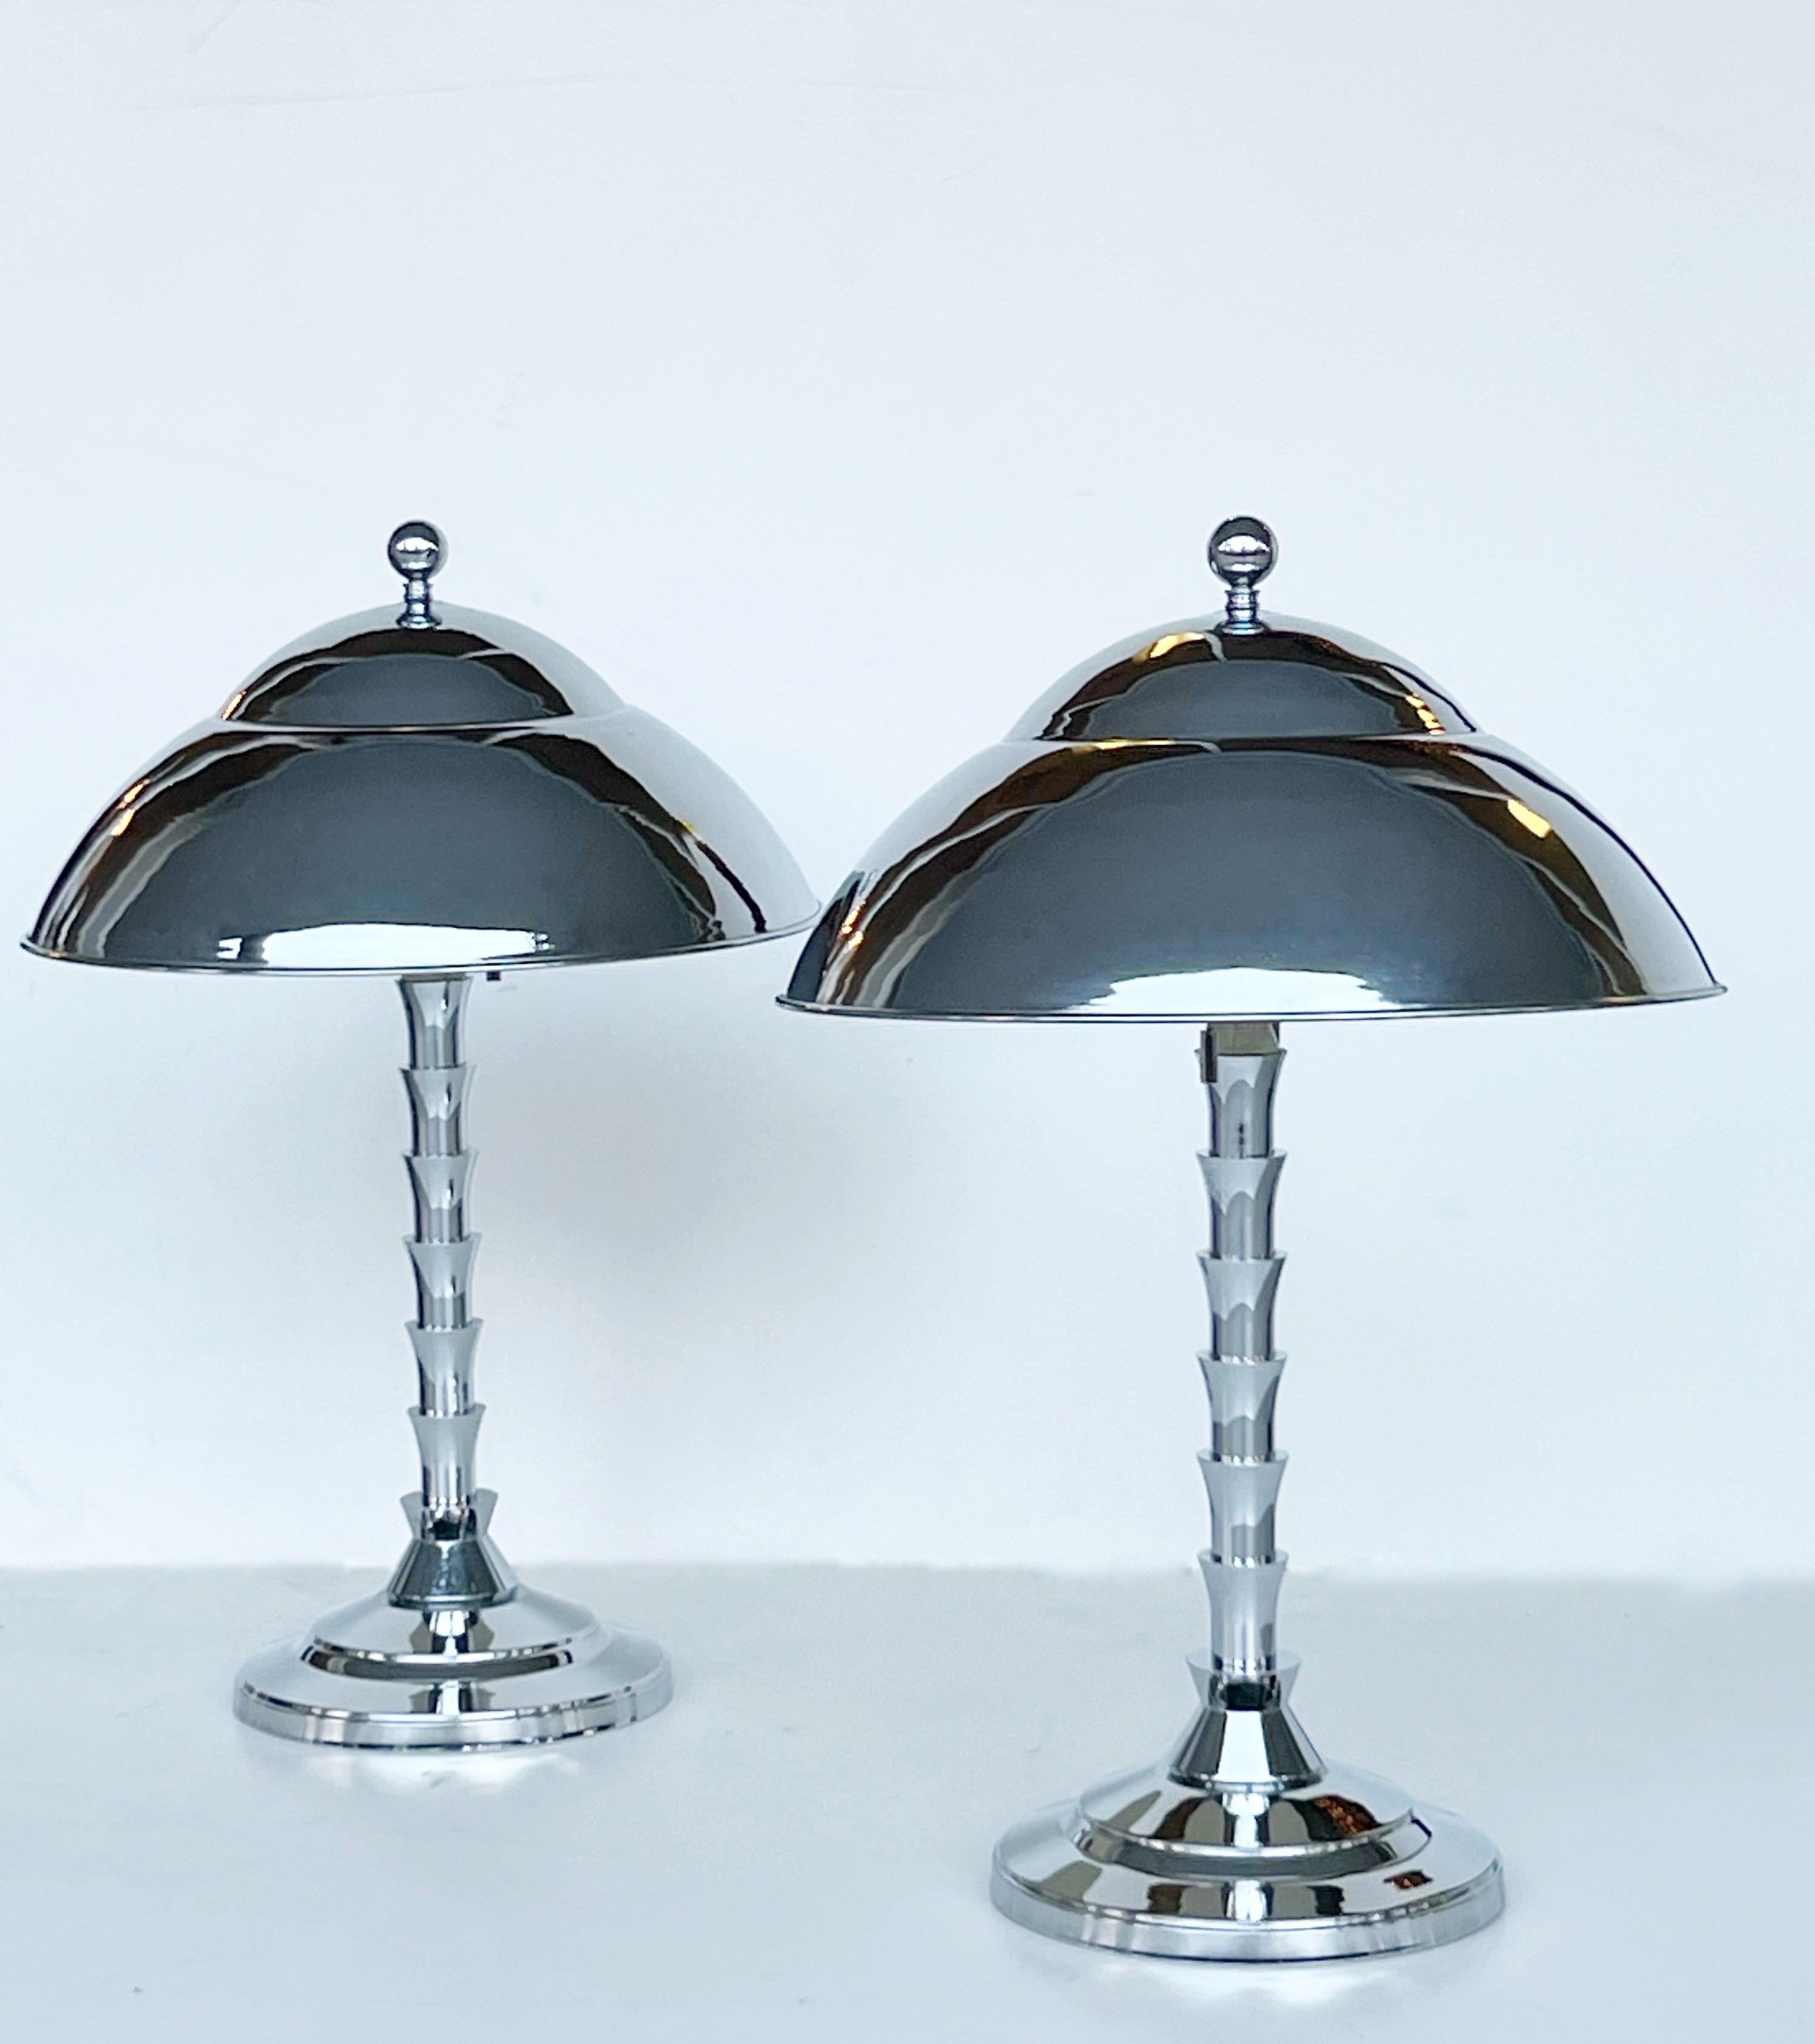 Iconic pair of lamps by Hanson, designed by Jay Spectre. 